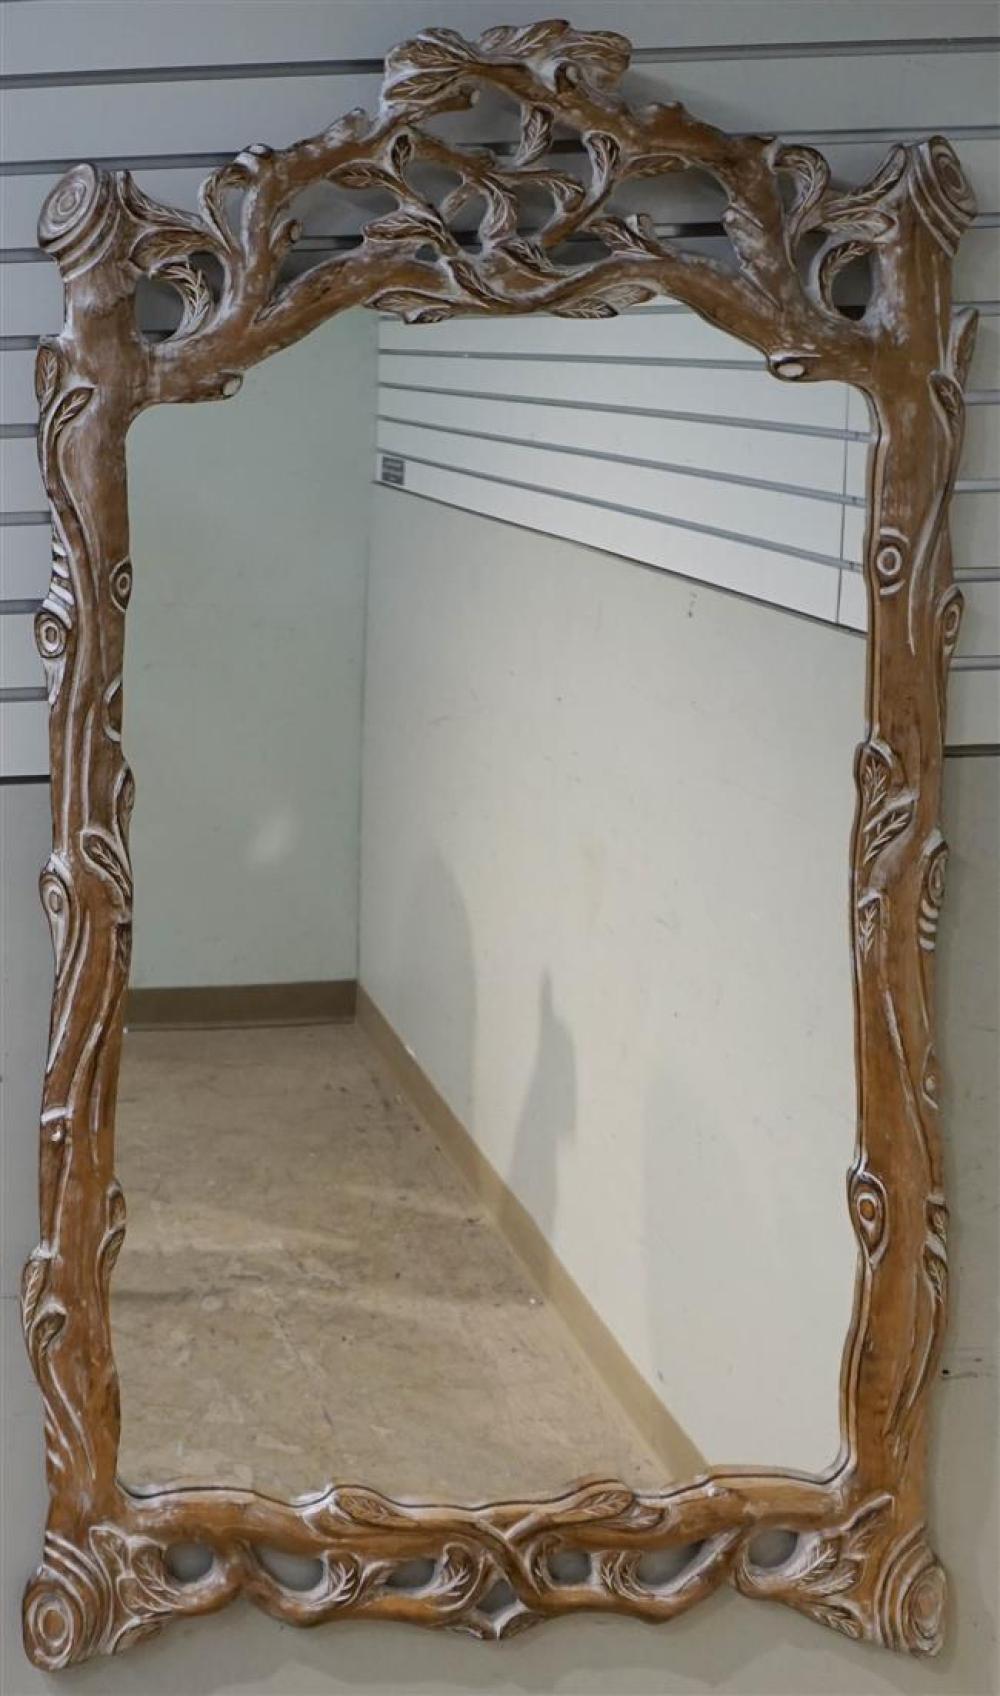 RUSTIC WHITEWASHED WOOD MIRROR  32419d